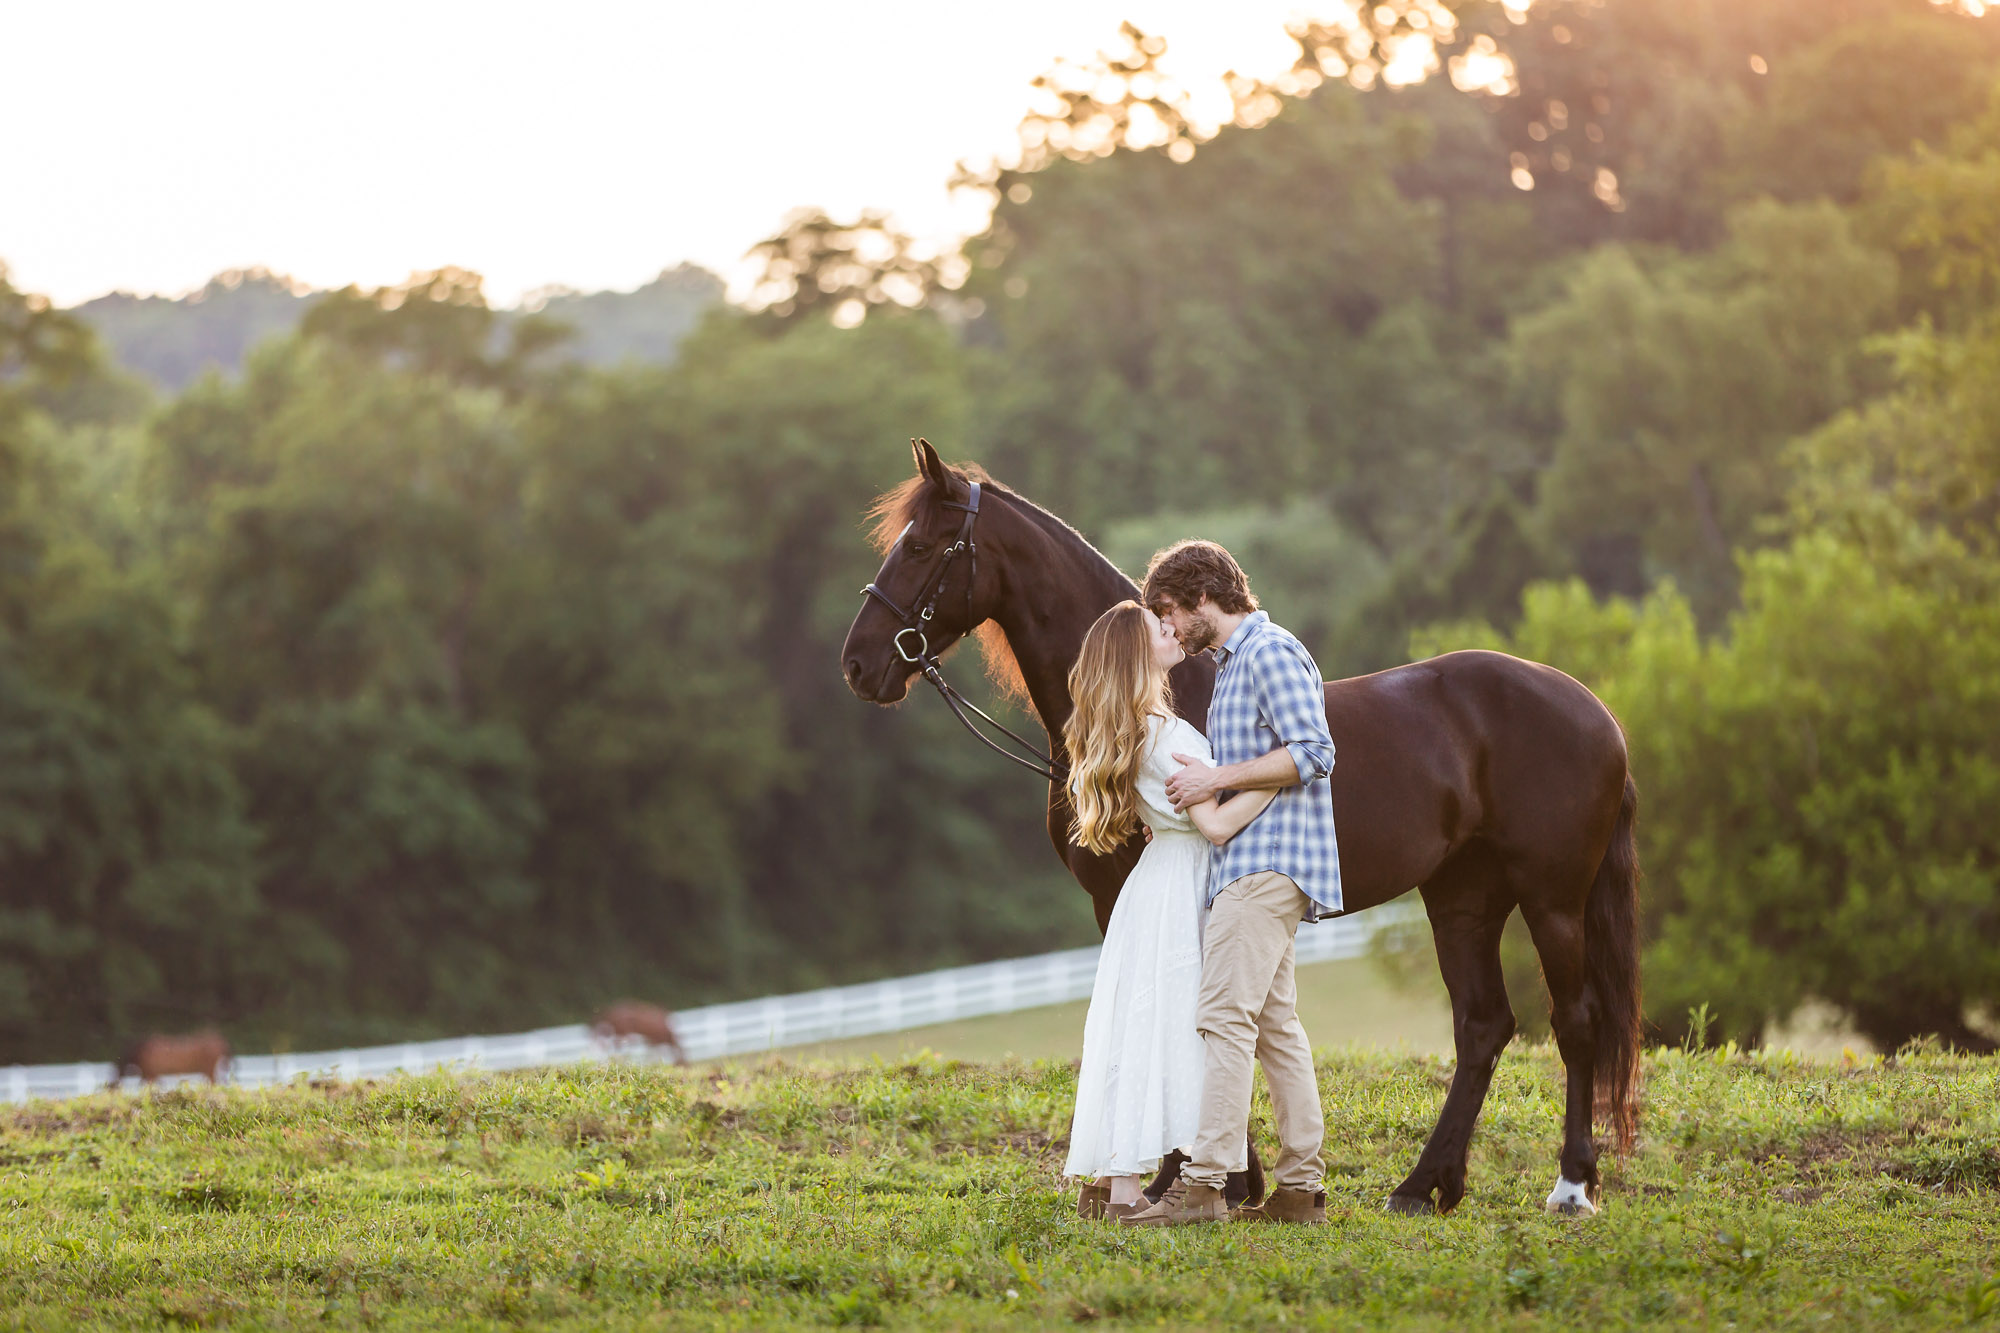 man and woman kissing in front of horse in field